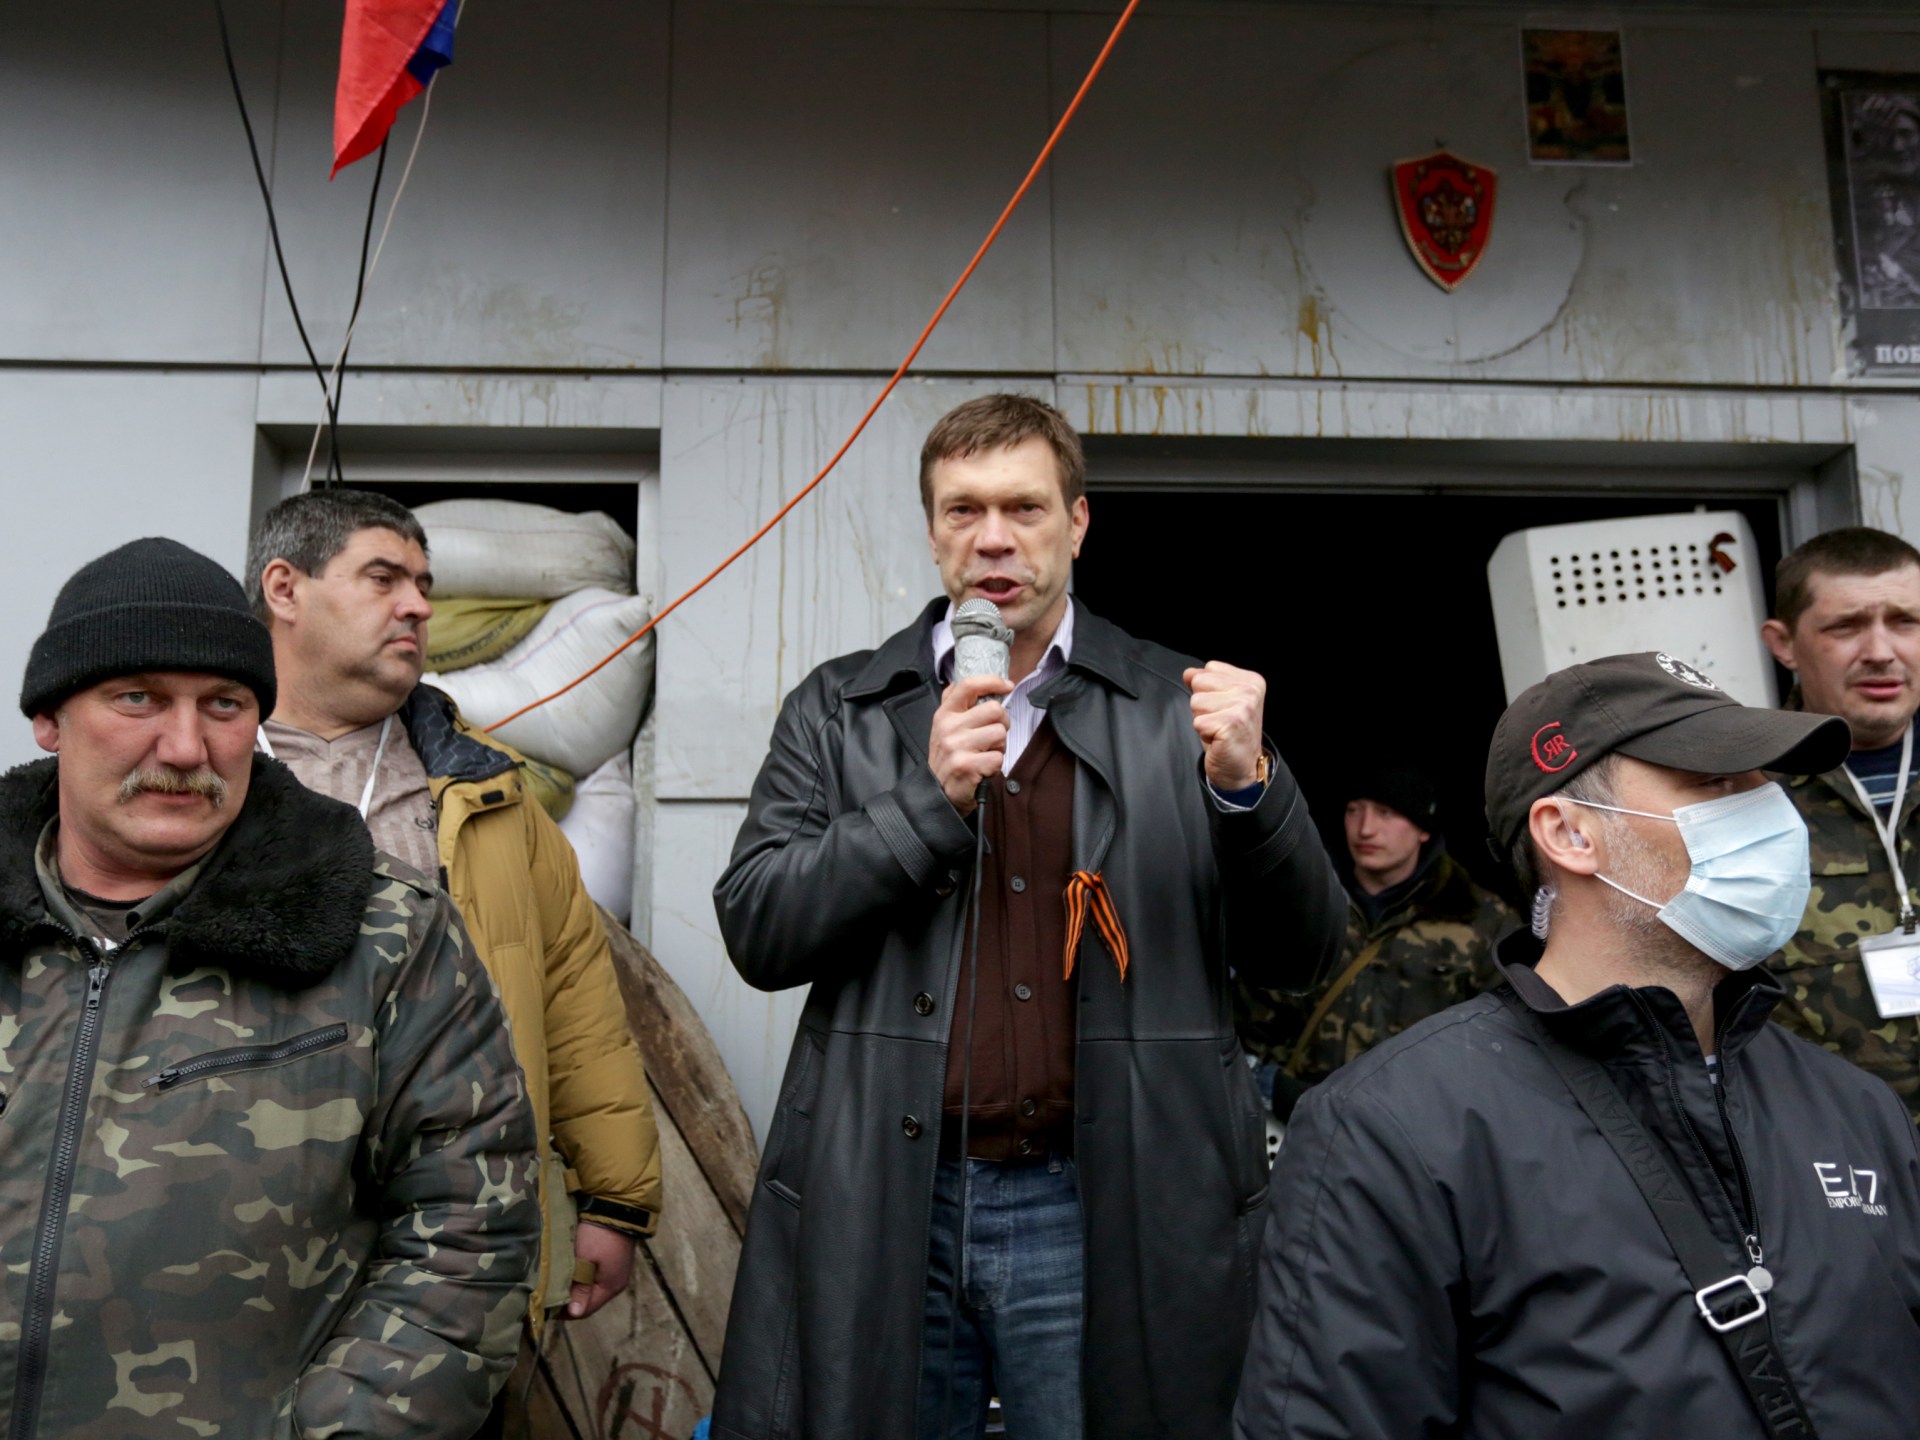 Russia says Kyiv behind shooting of Ukrainian pro-Moscow separatist leader